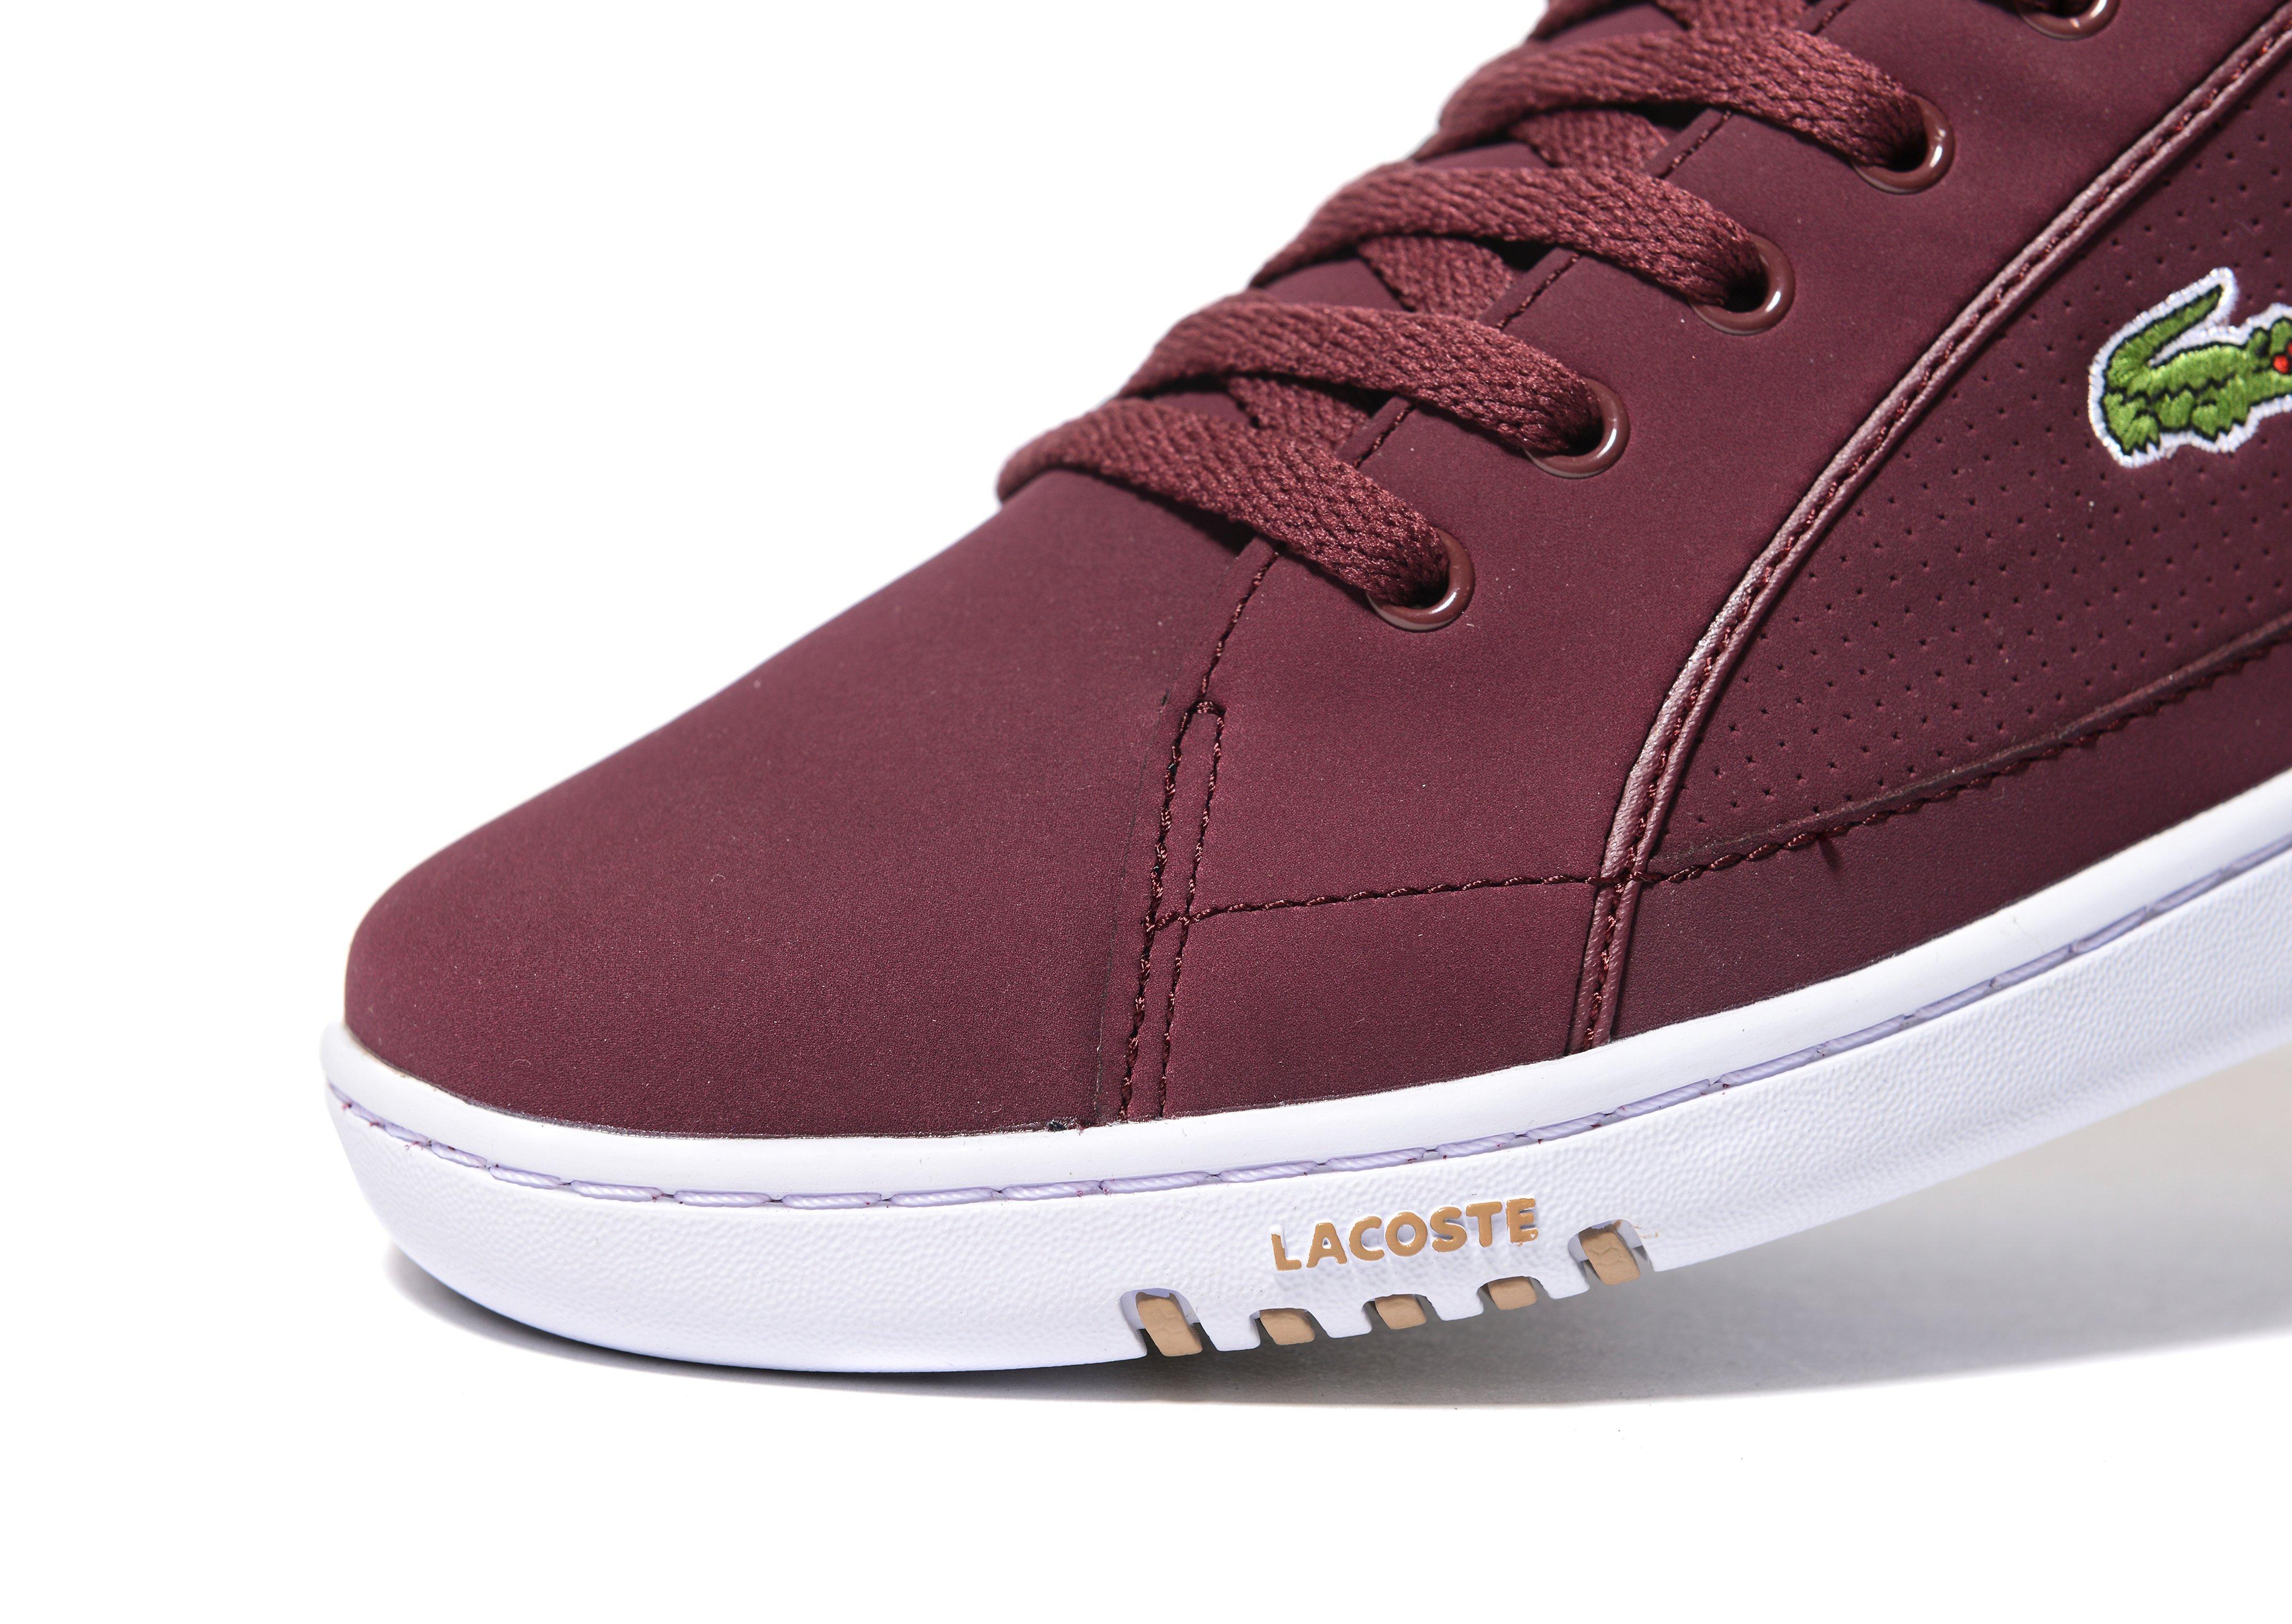 Lacoste Leather Deviation 217 in 